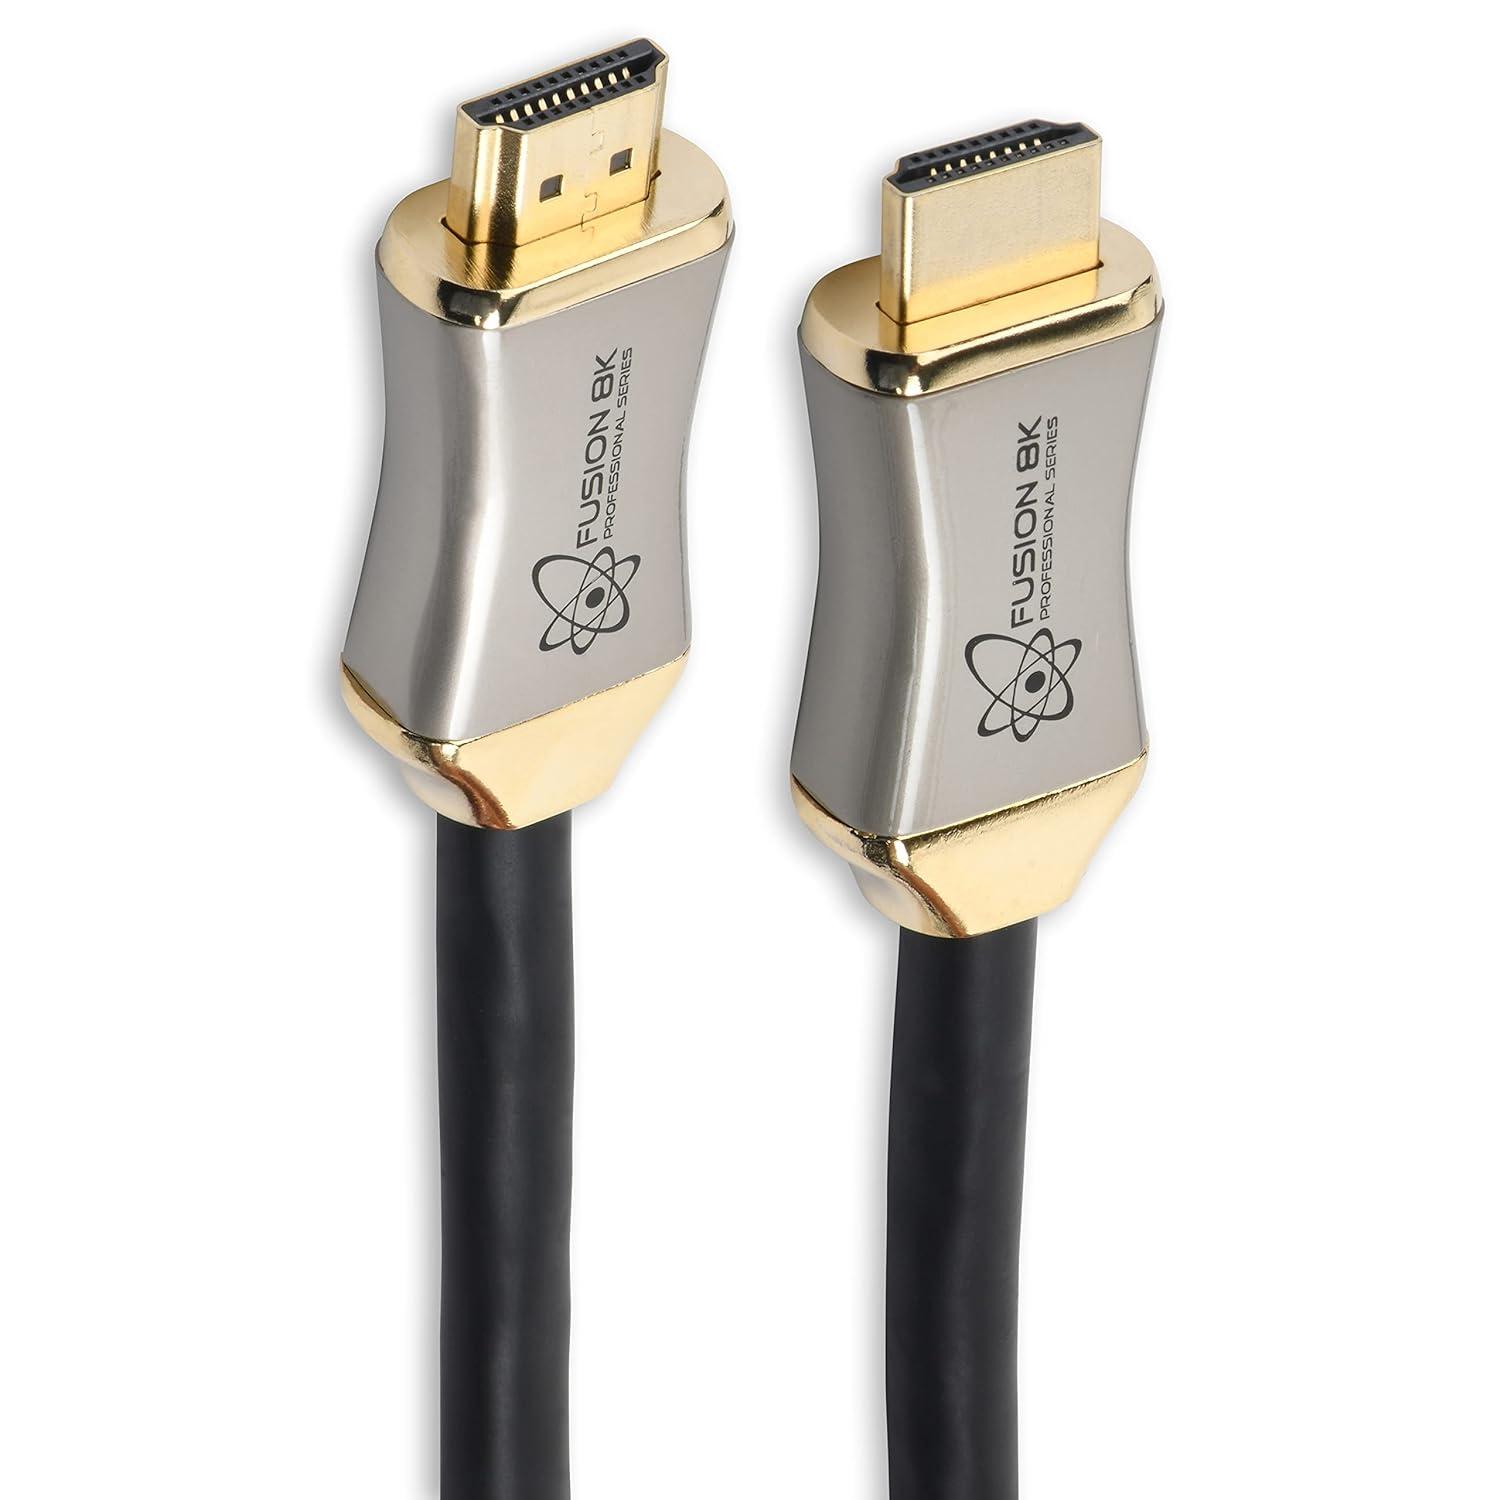 Fusion8K HDMI 2.1 Certified Cable Supports 8K 60Hz and 4K 120Hz